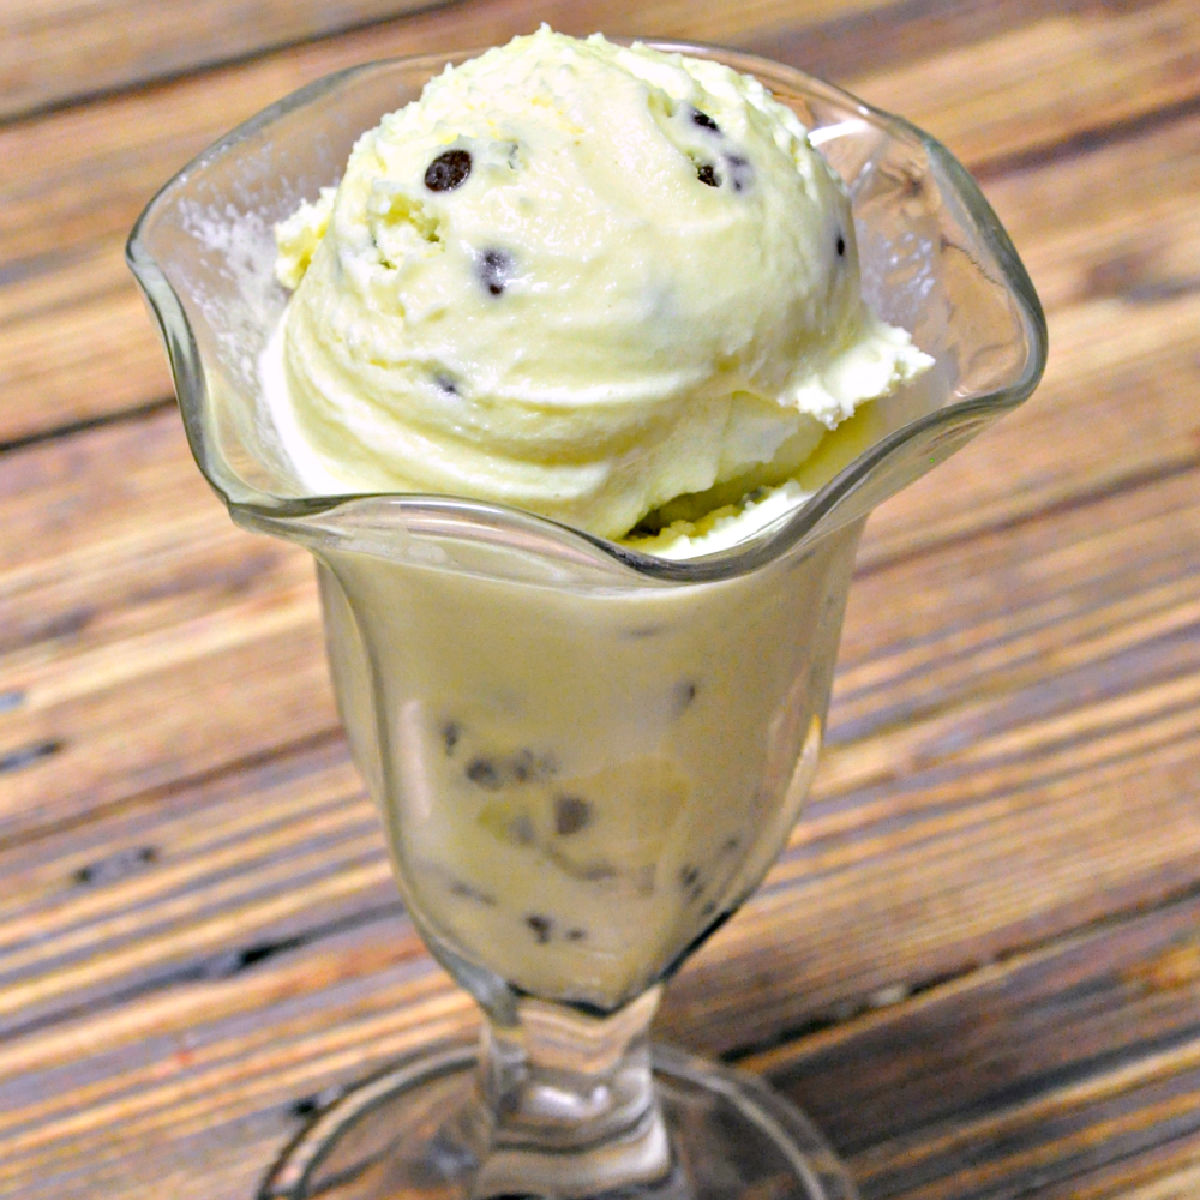 Mint chocolate chip ice cream served in a glass parfait dish.